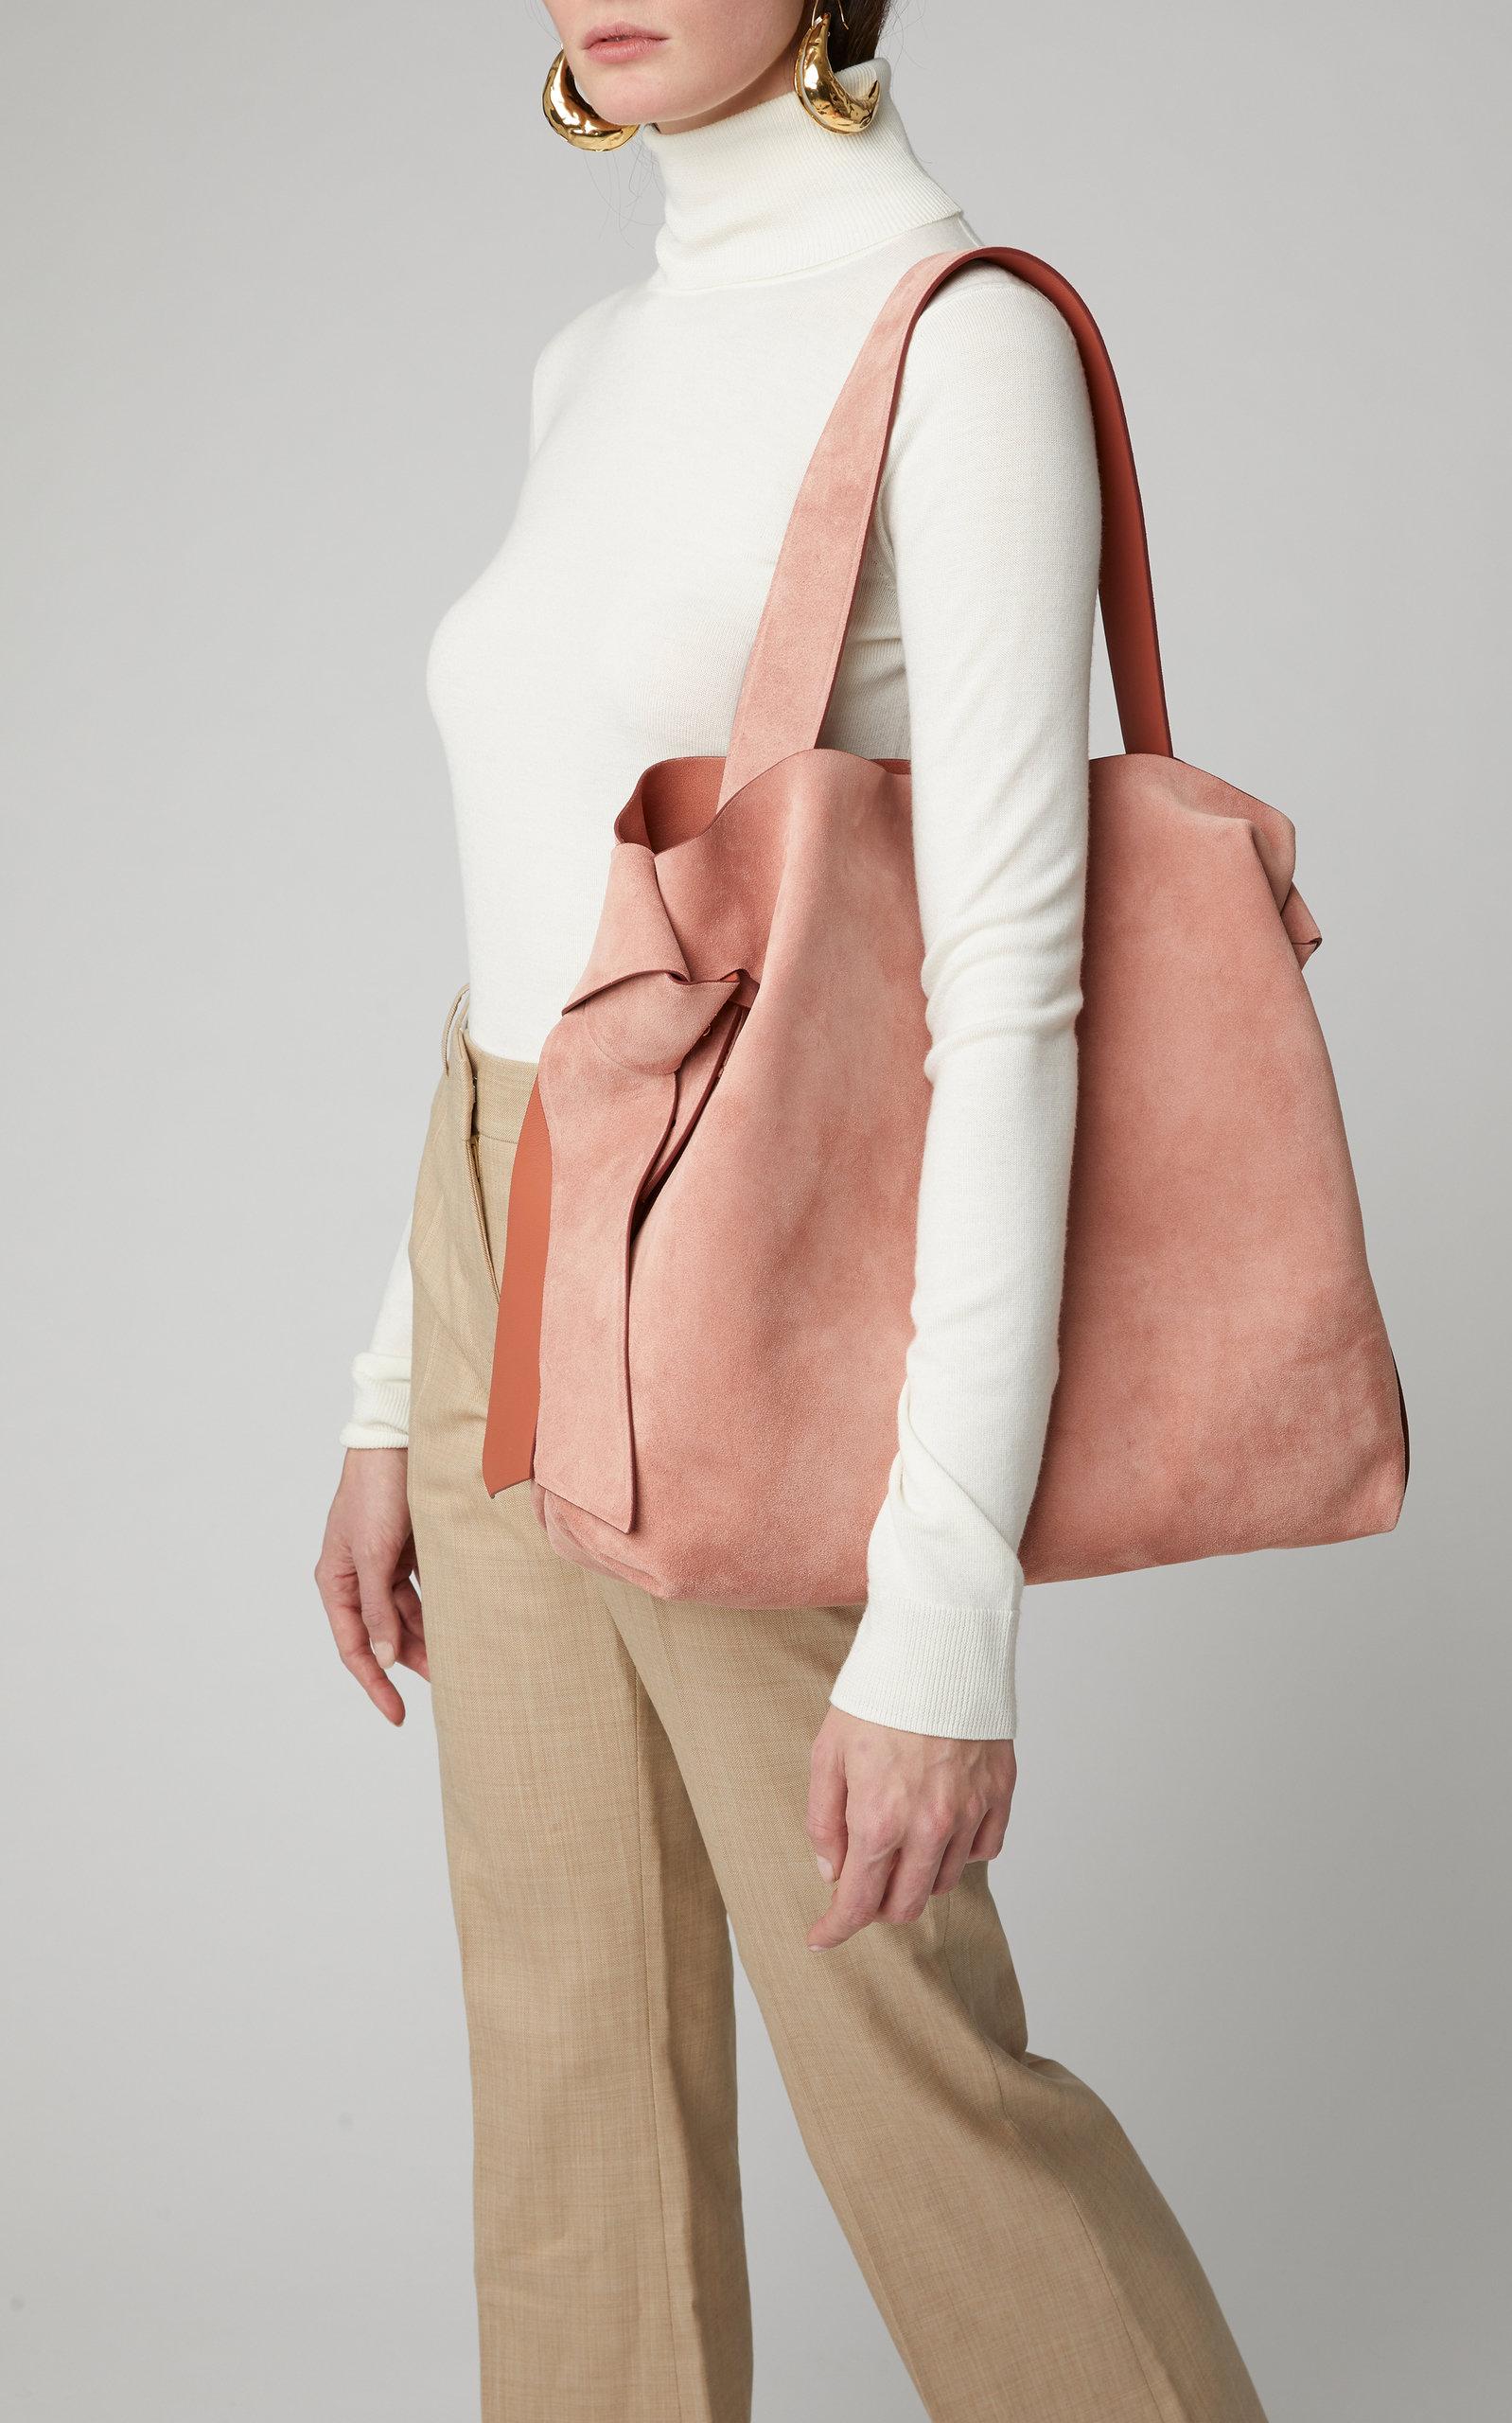 Acne Studios Musubi Maxi Knotted Suede Shoulder Bag in Pink - Lyst